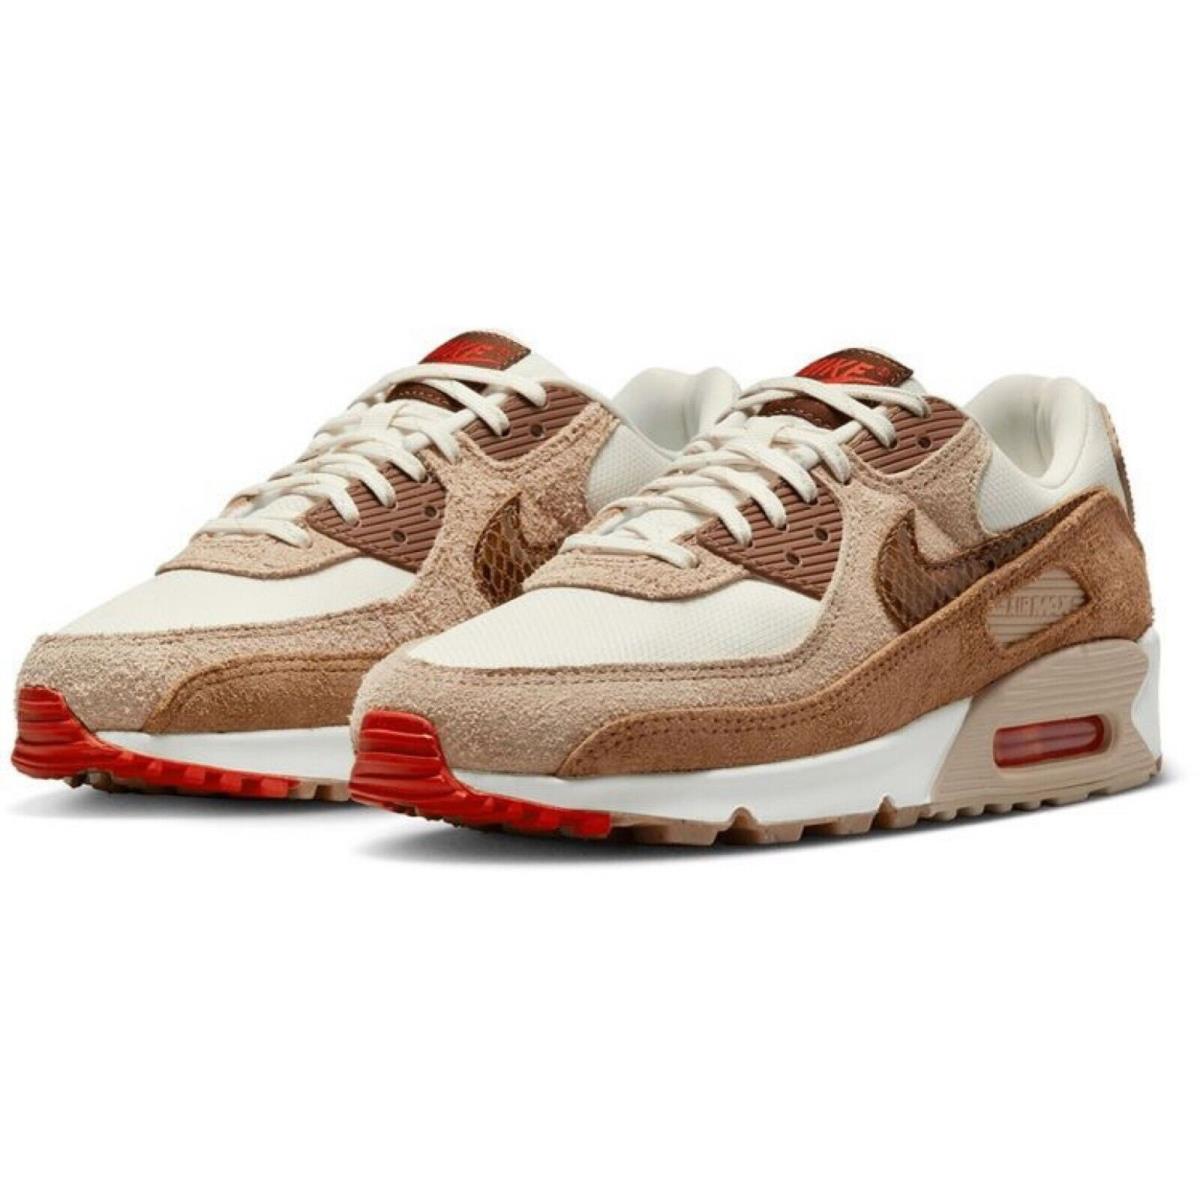 Nike shoes Air Max - Brown , White/red Manufacturer 2